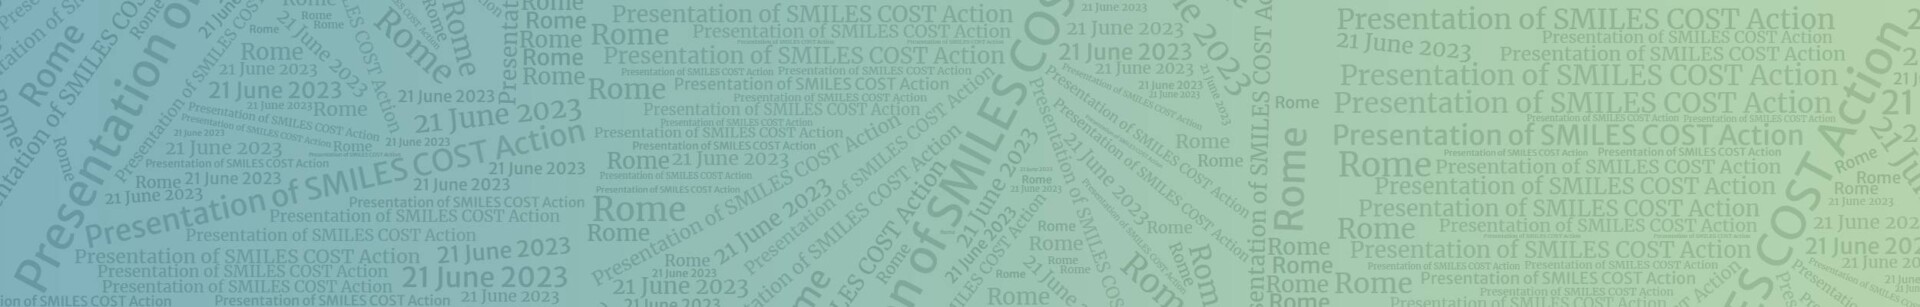 Presentation of SMILES COST Action